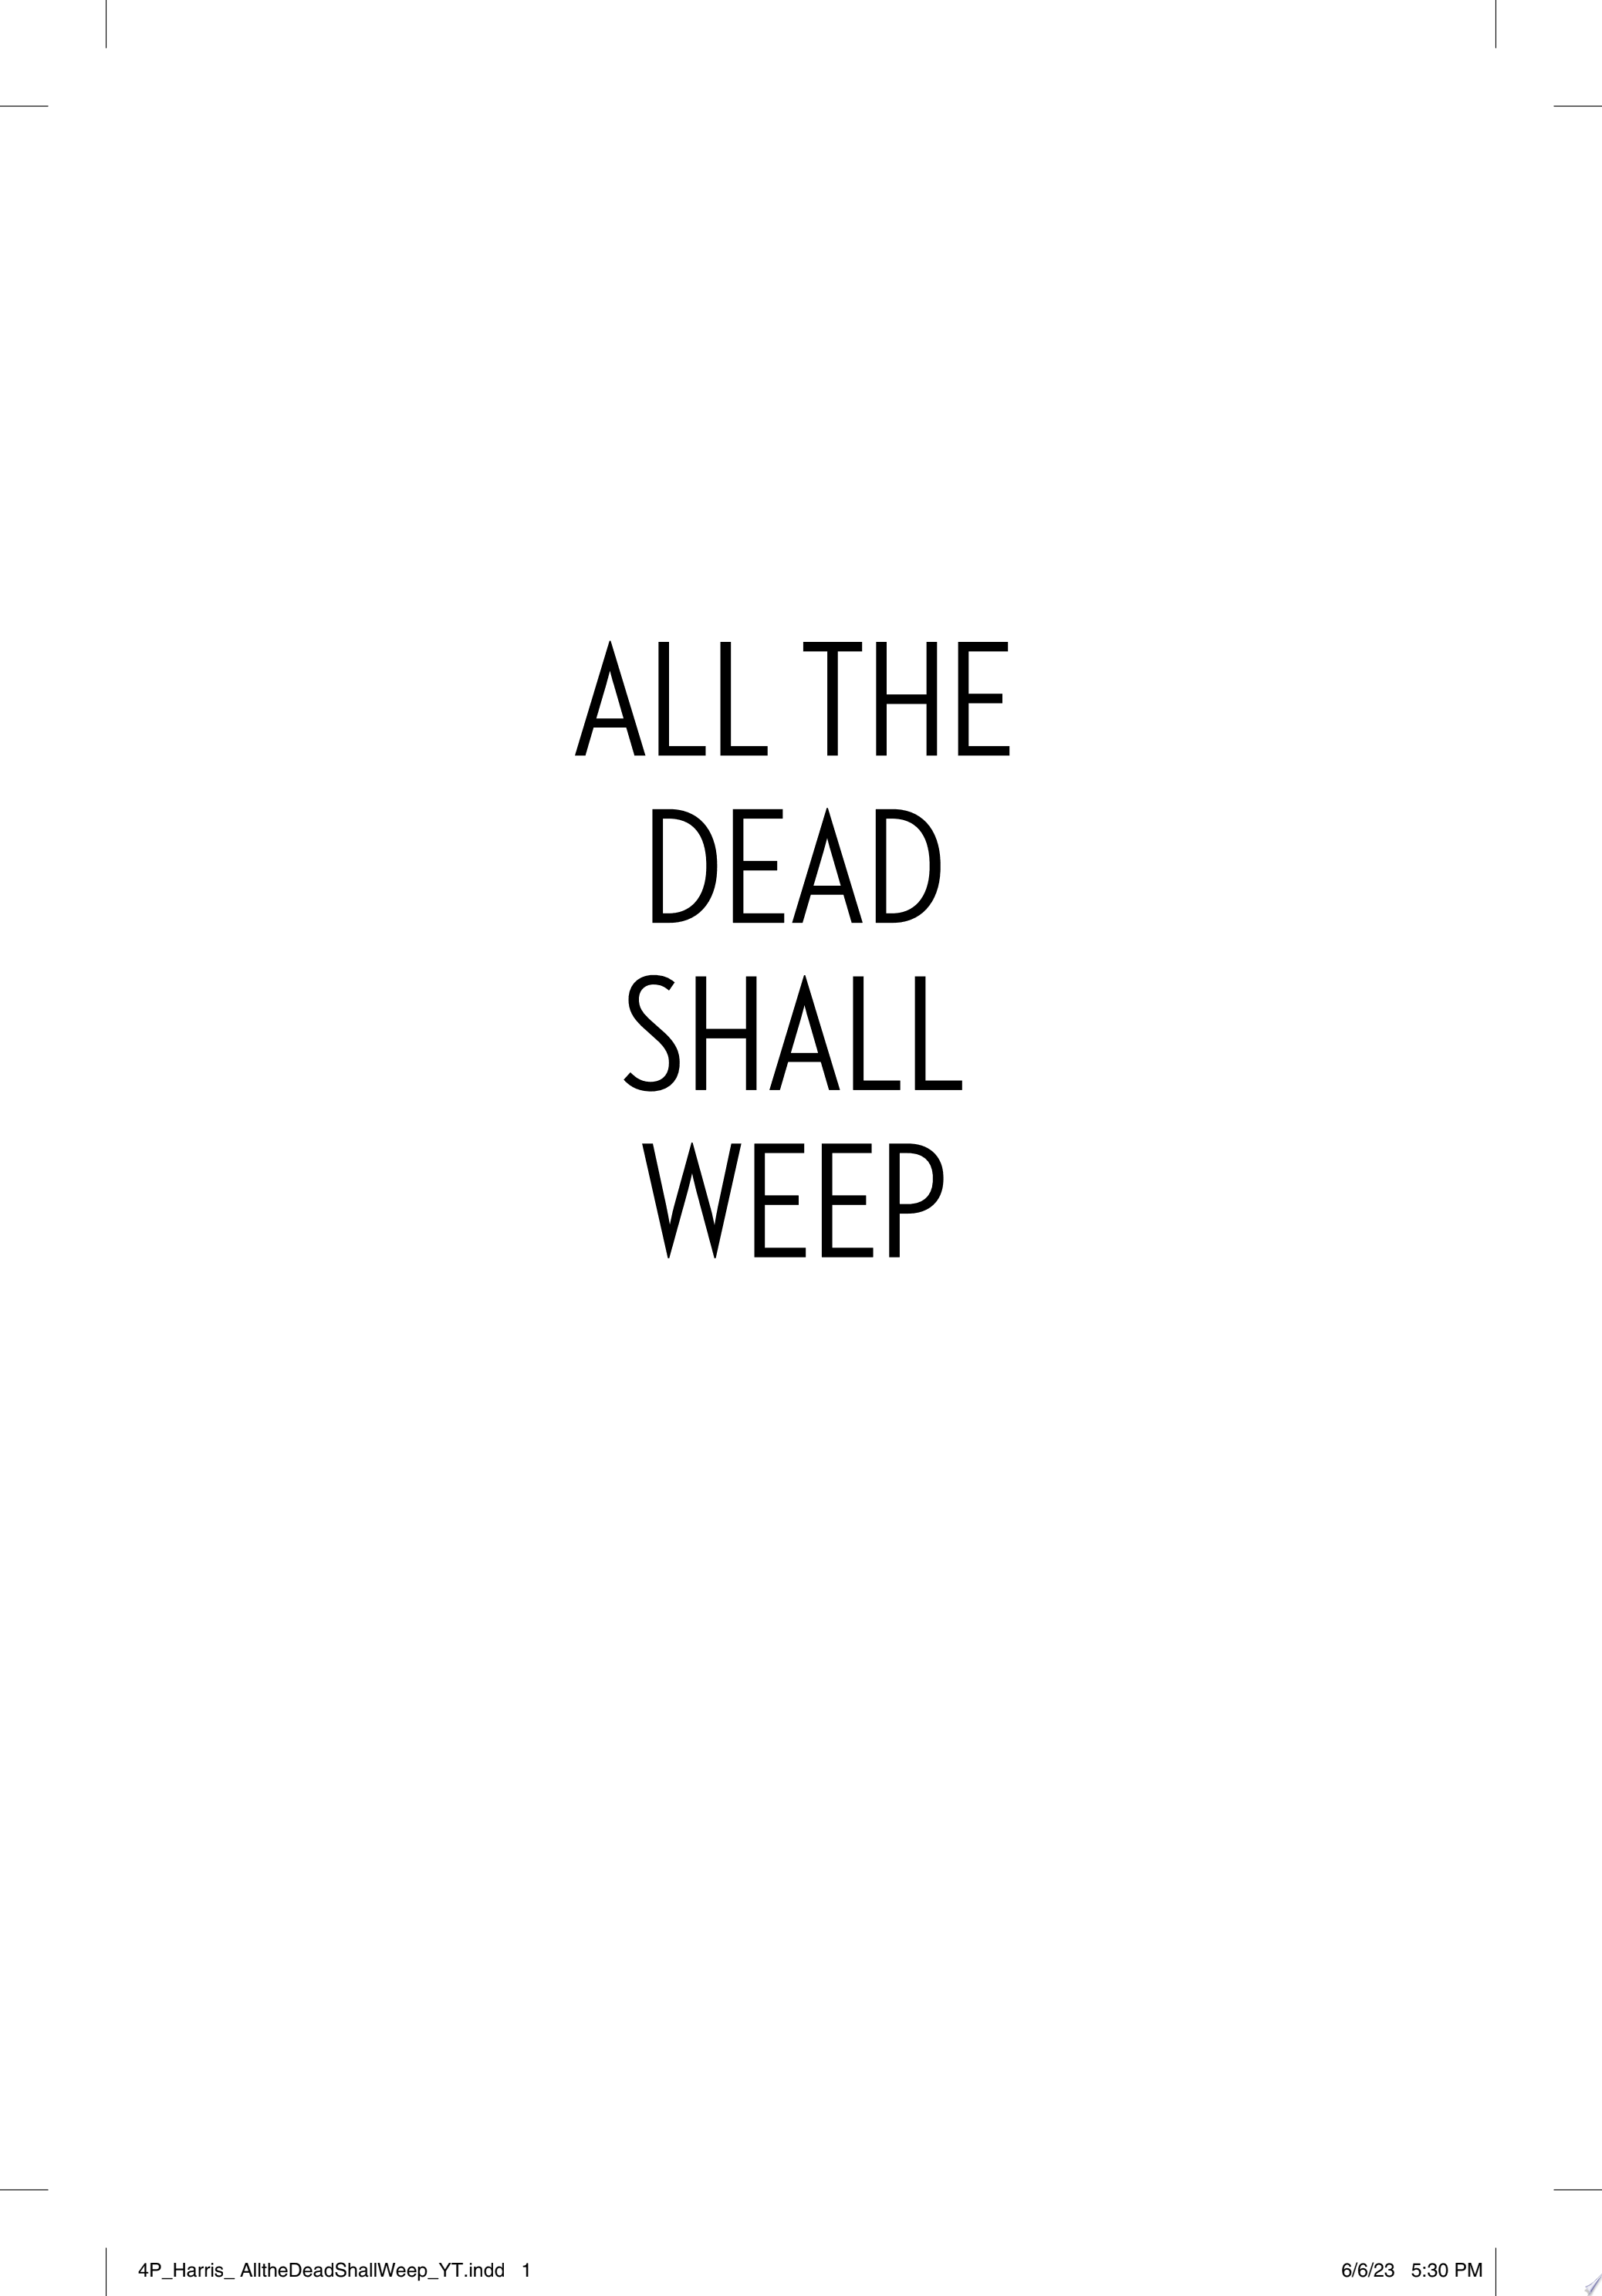 Image for "All the Dead Shall Weep"